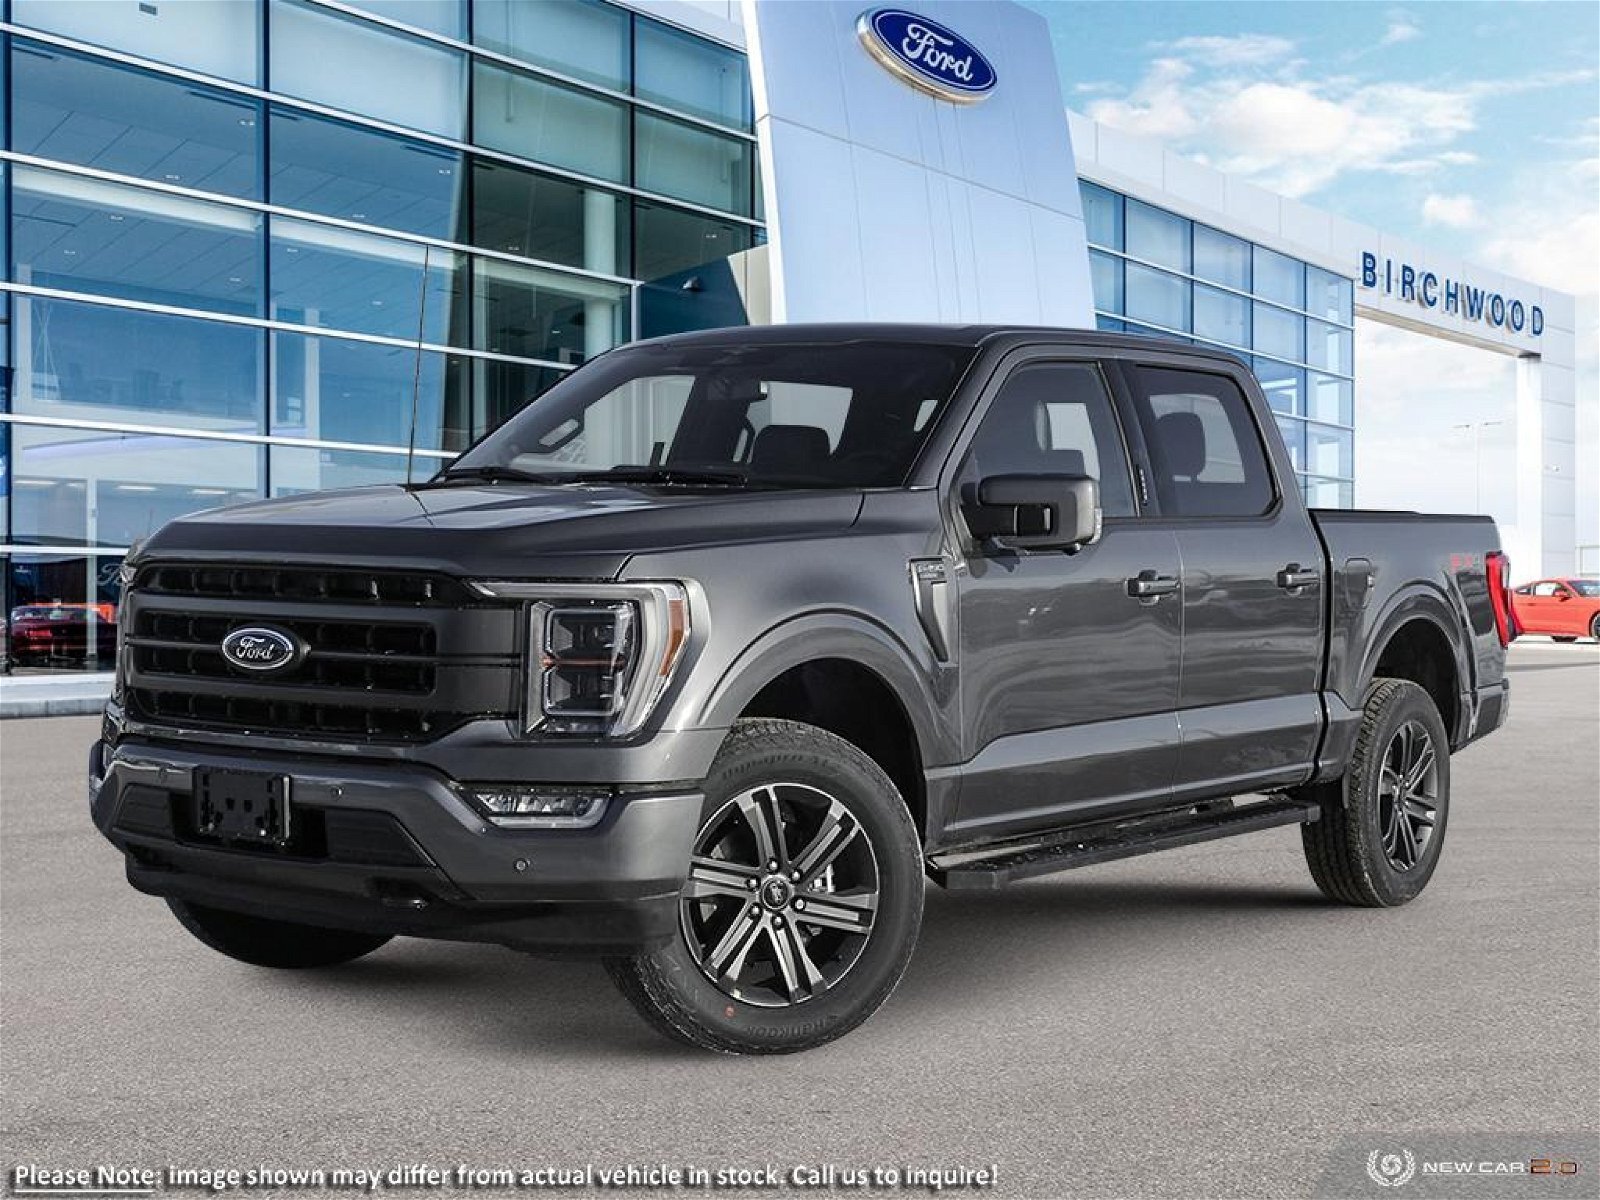 2023 Ford F-150 LARIAT DEMO Blowout - $14623 OFF